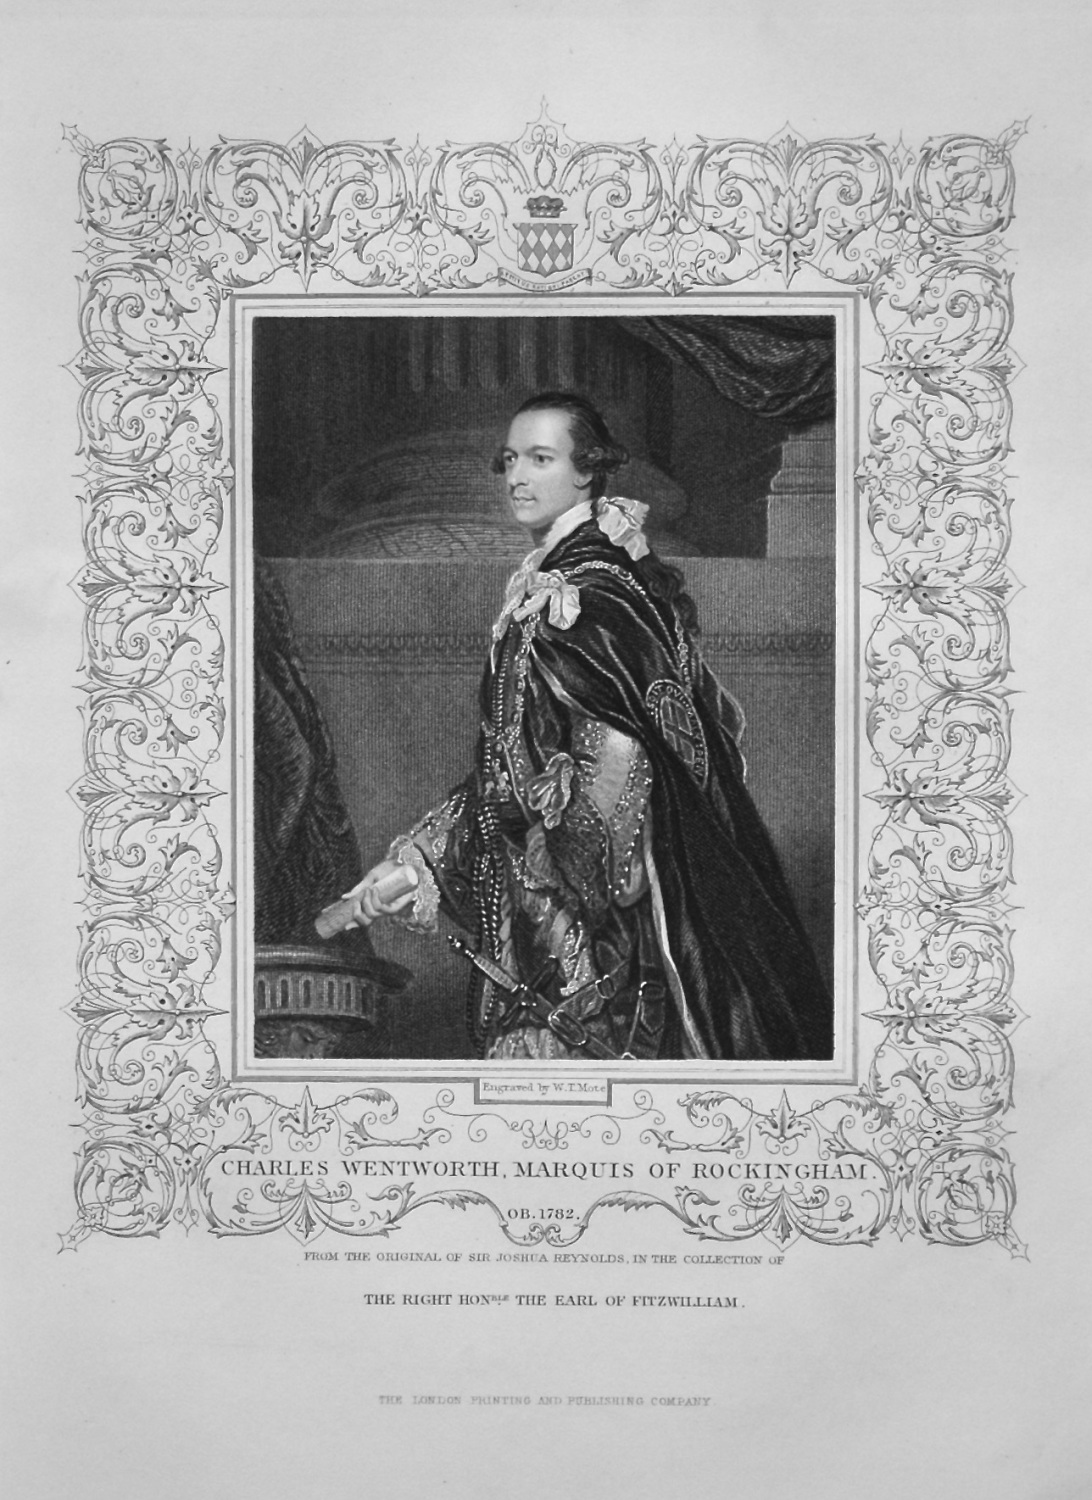 Charles Wentworth, Marquis of Rockingham. OB. 1782. From the original of Si